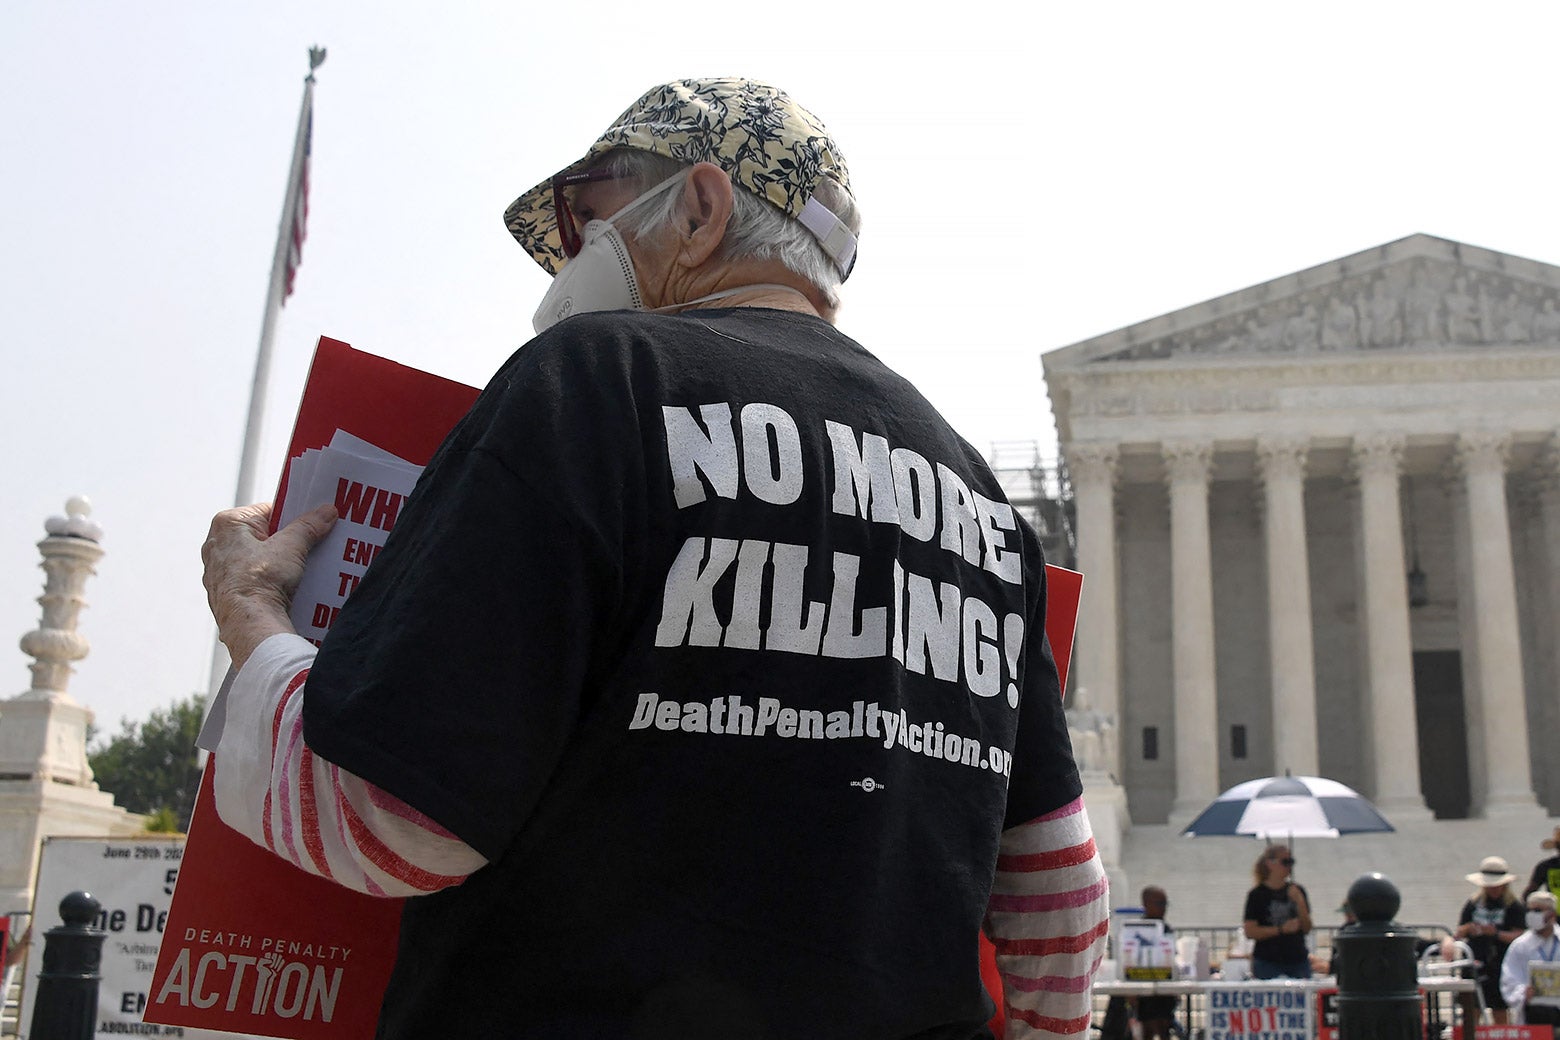 Connecticut May Have Figured Out a Way to Halt Executions in Texas